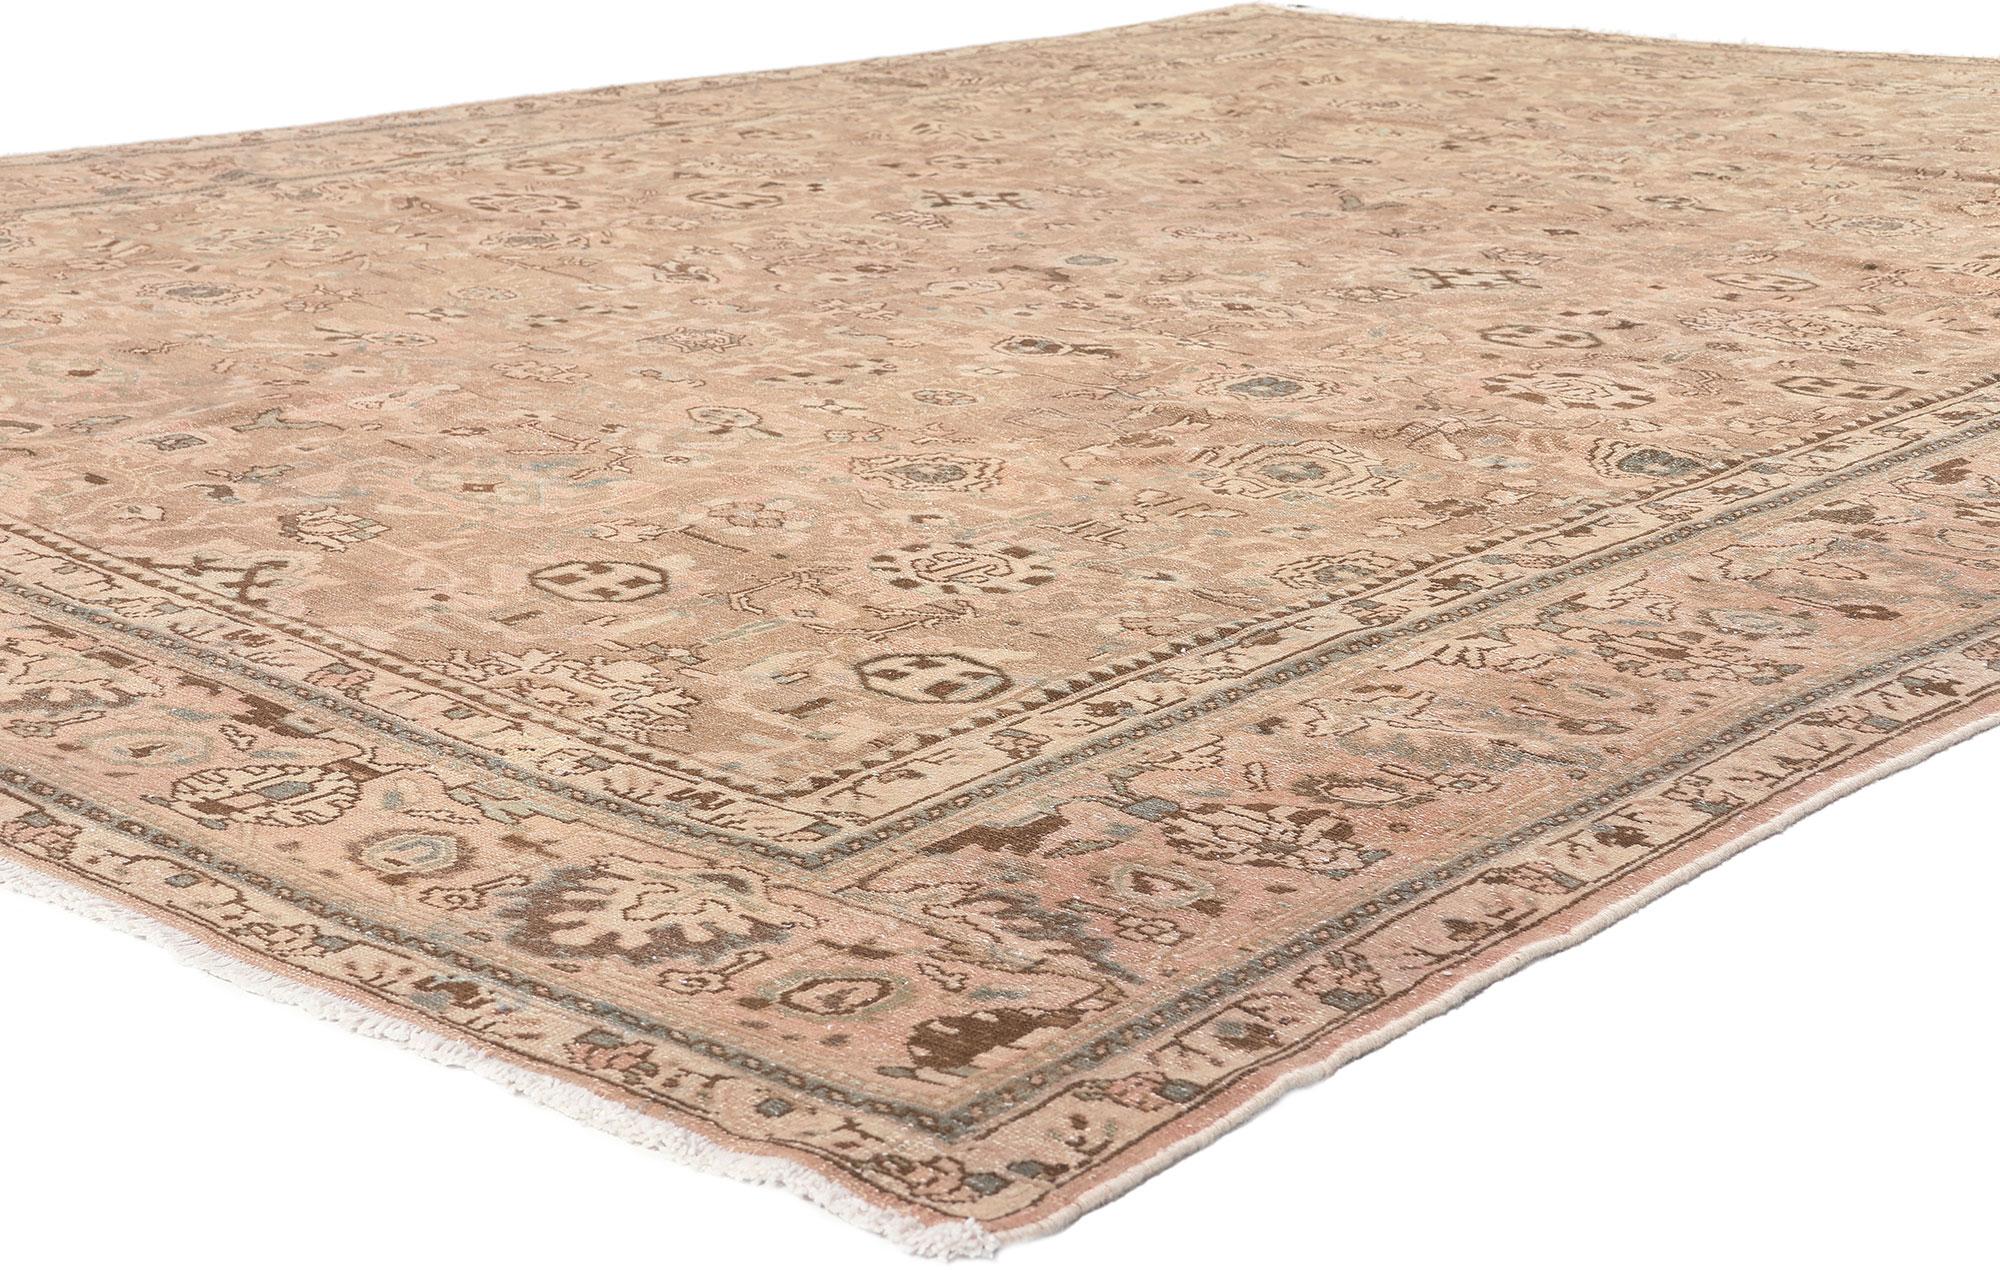 61266 Vintage-Worn Persian Malayer Rug, 09'03 x 12'02.
​Tonal elegance meets timeless appeal in this hand knotted wool distressed vintage Persian Malayer rug.

Rendered in variegated shades of tan, pink, sage, brown, taupe, rose, taupe and sage with